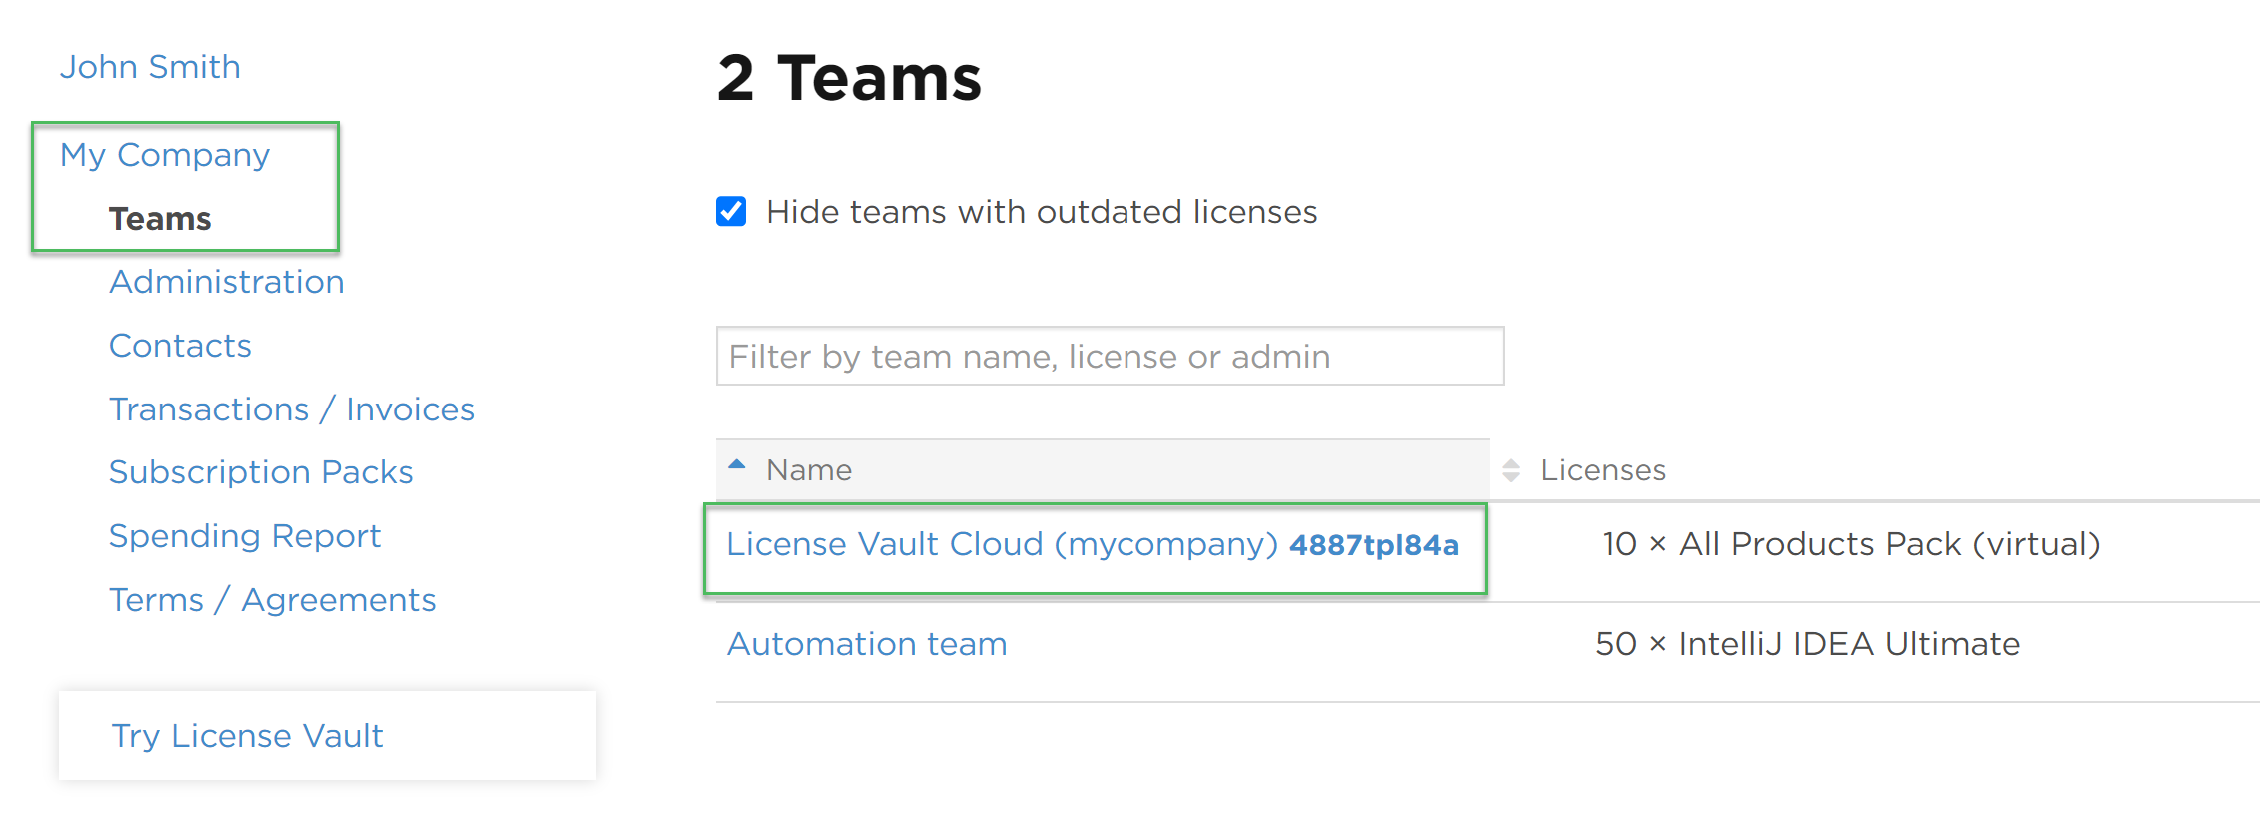 How to access License Vault from JetBrains Account